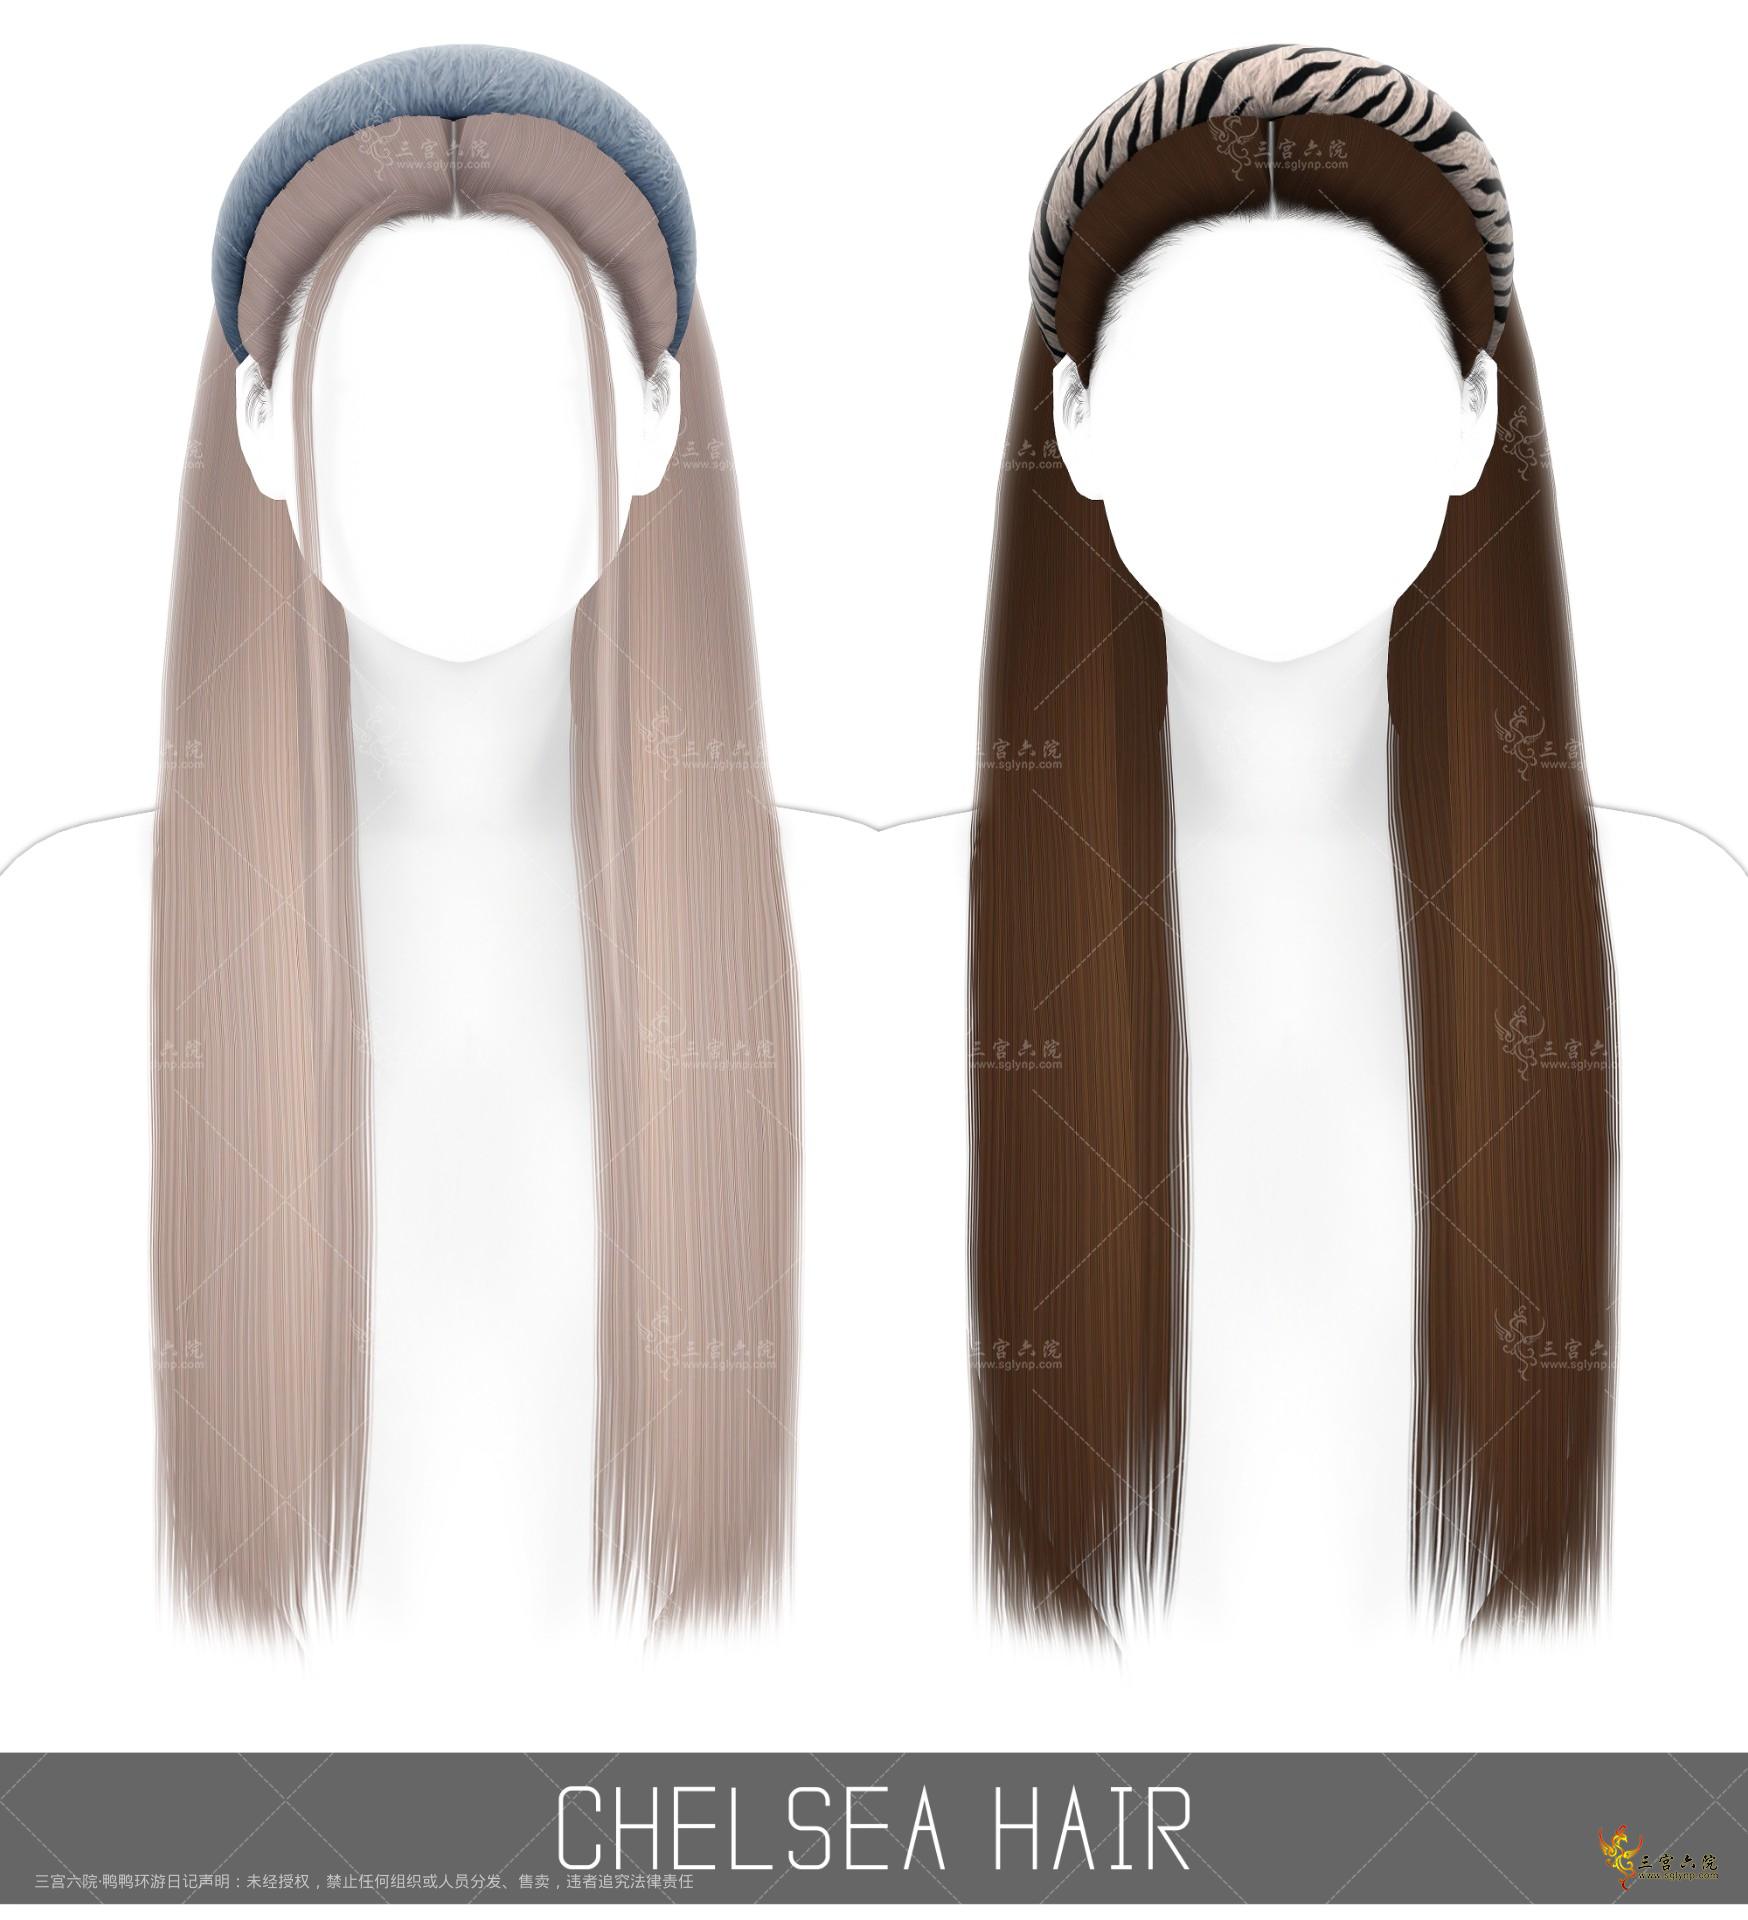 ChelseaHair.png